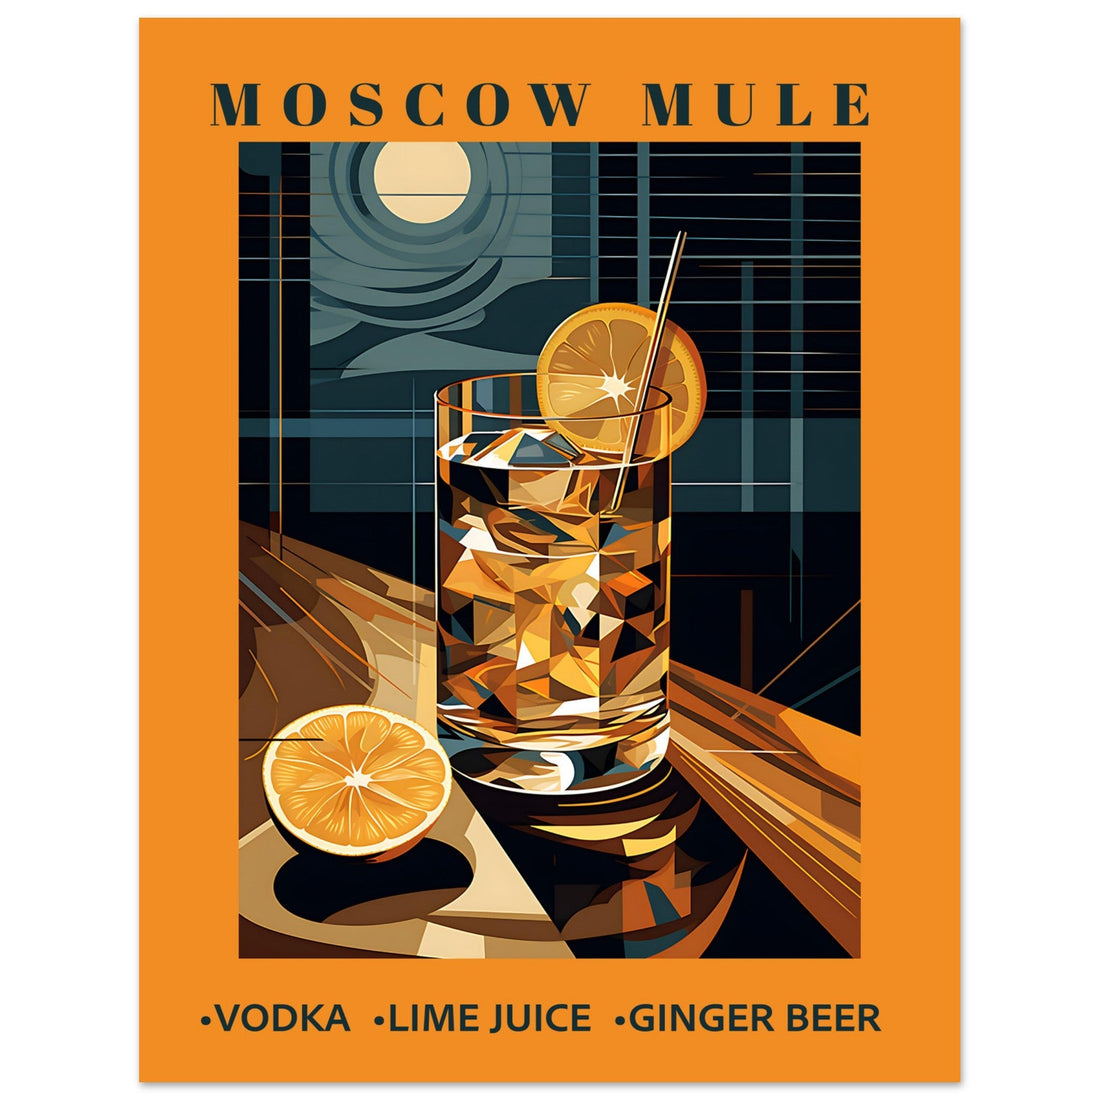 Moscow Mule Cocktail, bar art prints, kitchen art prints, Moscow Mule Art Print, #illieeart